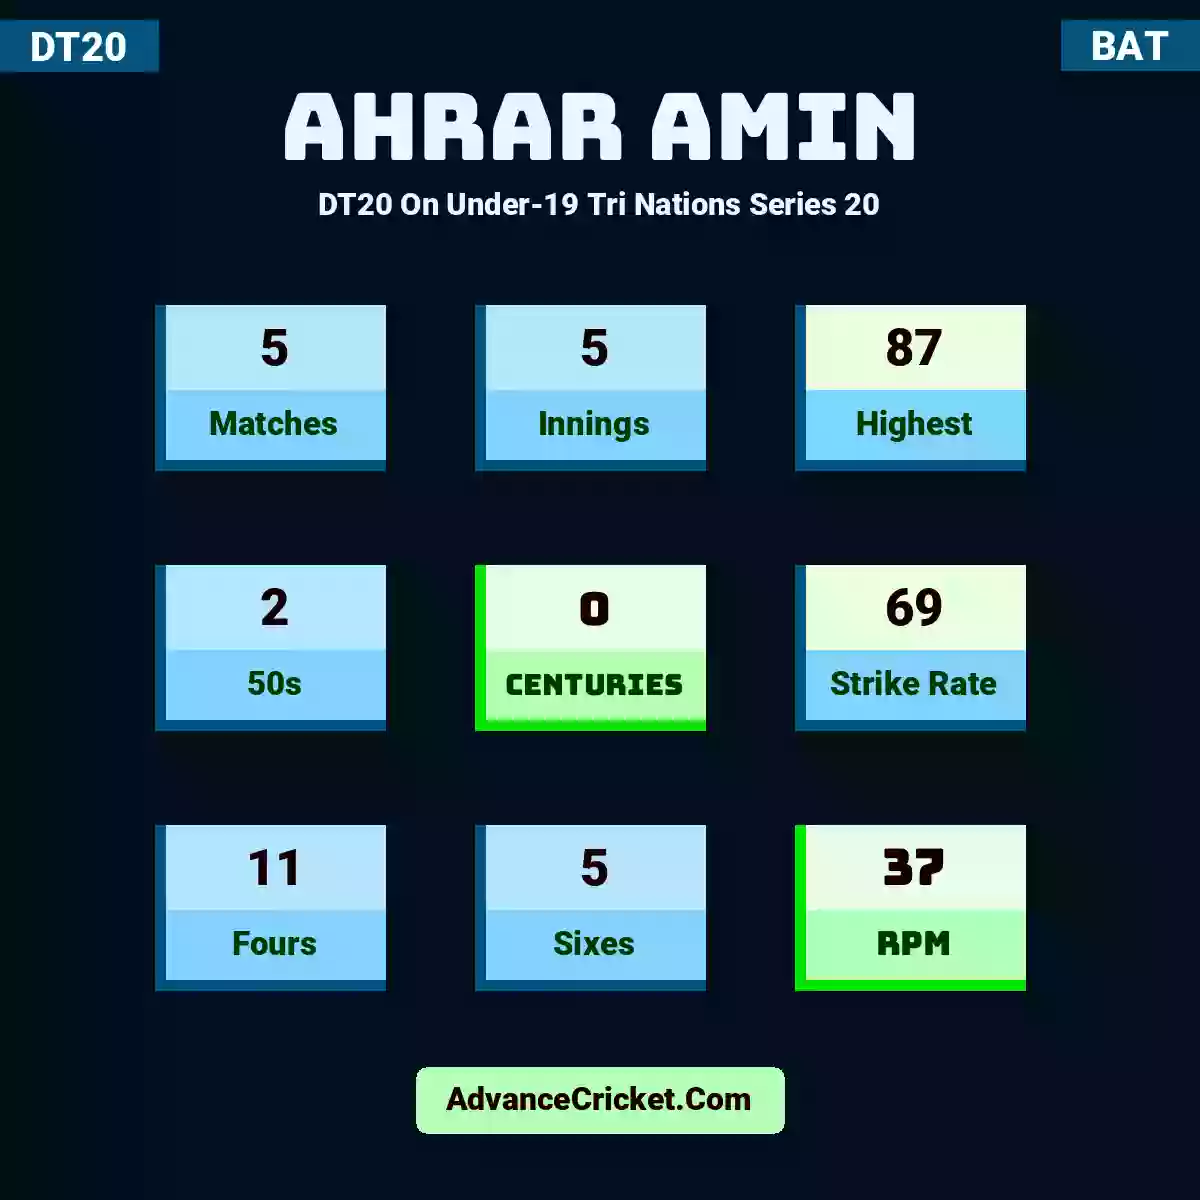 Ahrar Amin DT20  On Under-19 Tri Nations Series 20, Ahrar Amin played 5 matches, scored 87 runs as highest, 2 half-centuries, and 0 centuries, with a strike rate of 69. A.Amin hit 11 fours and 5 sixes, with an RPM of 37.